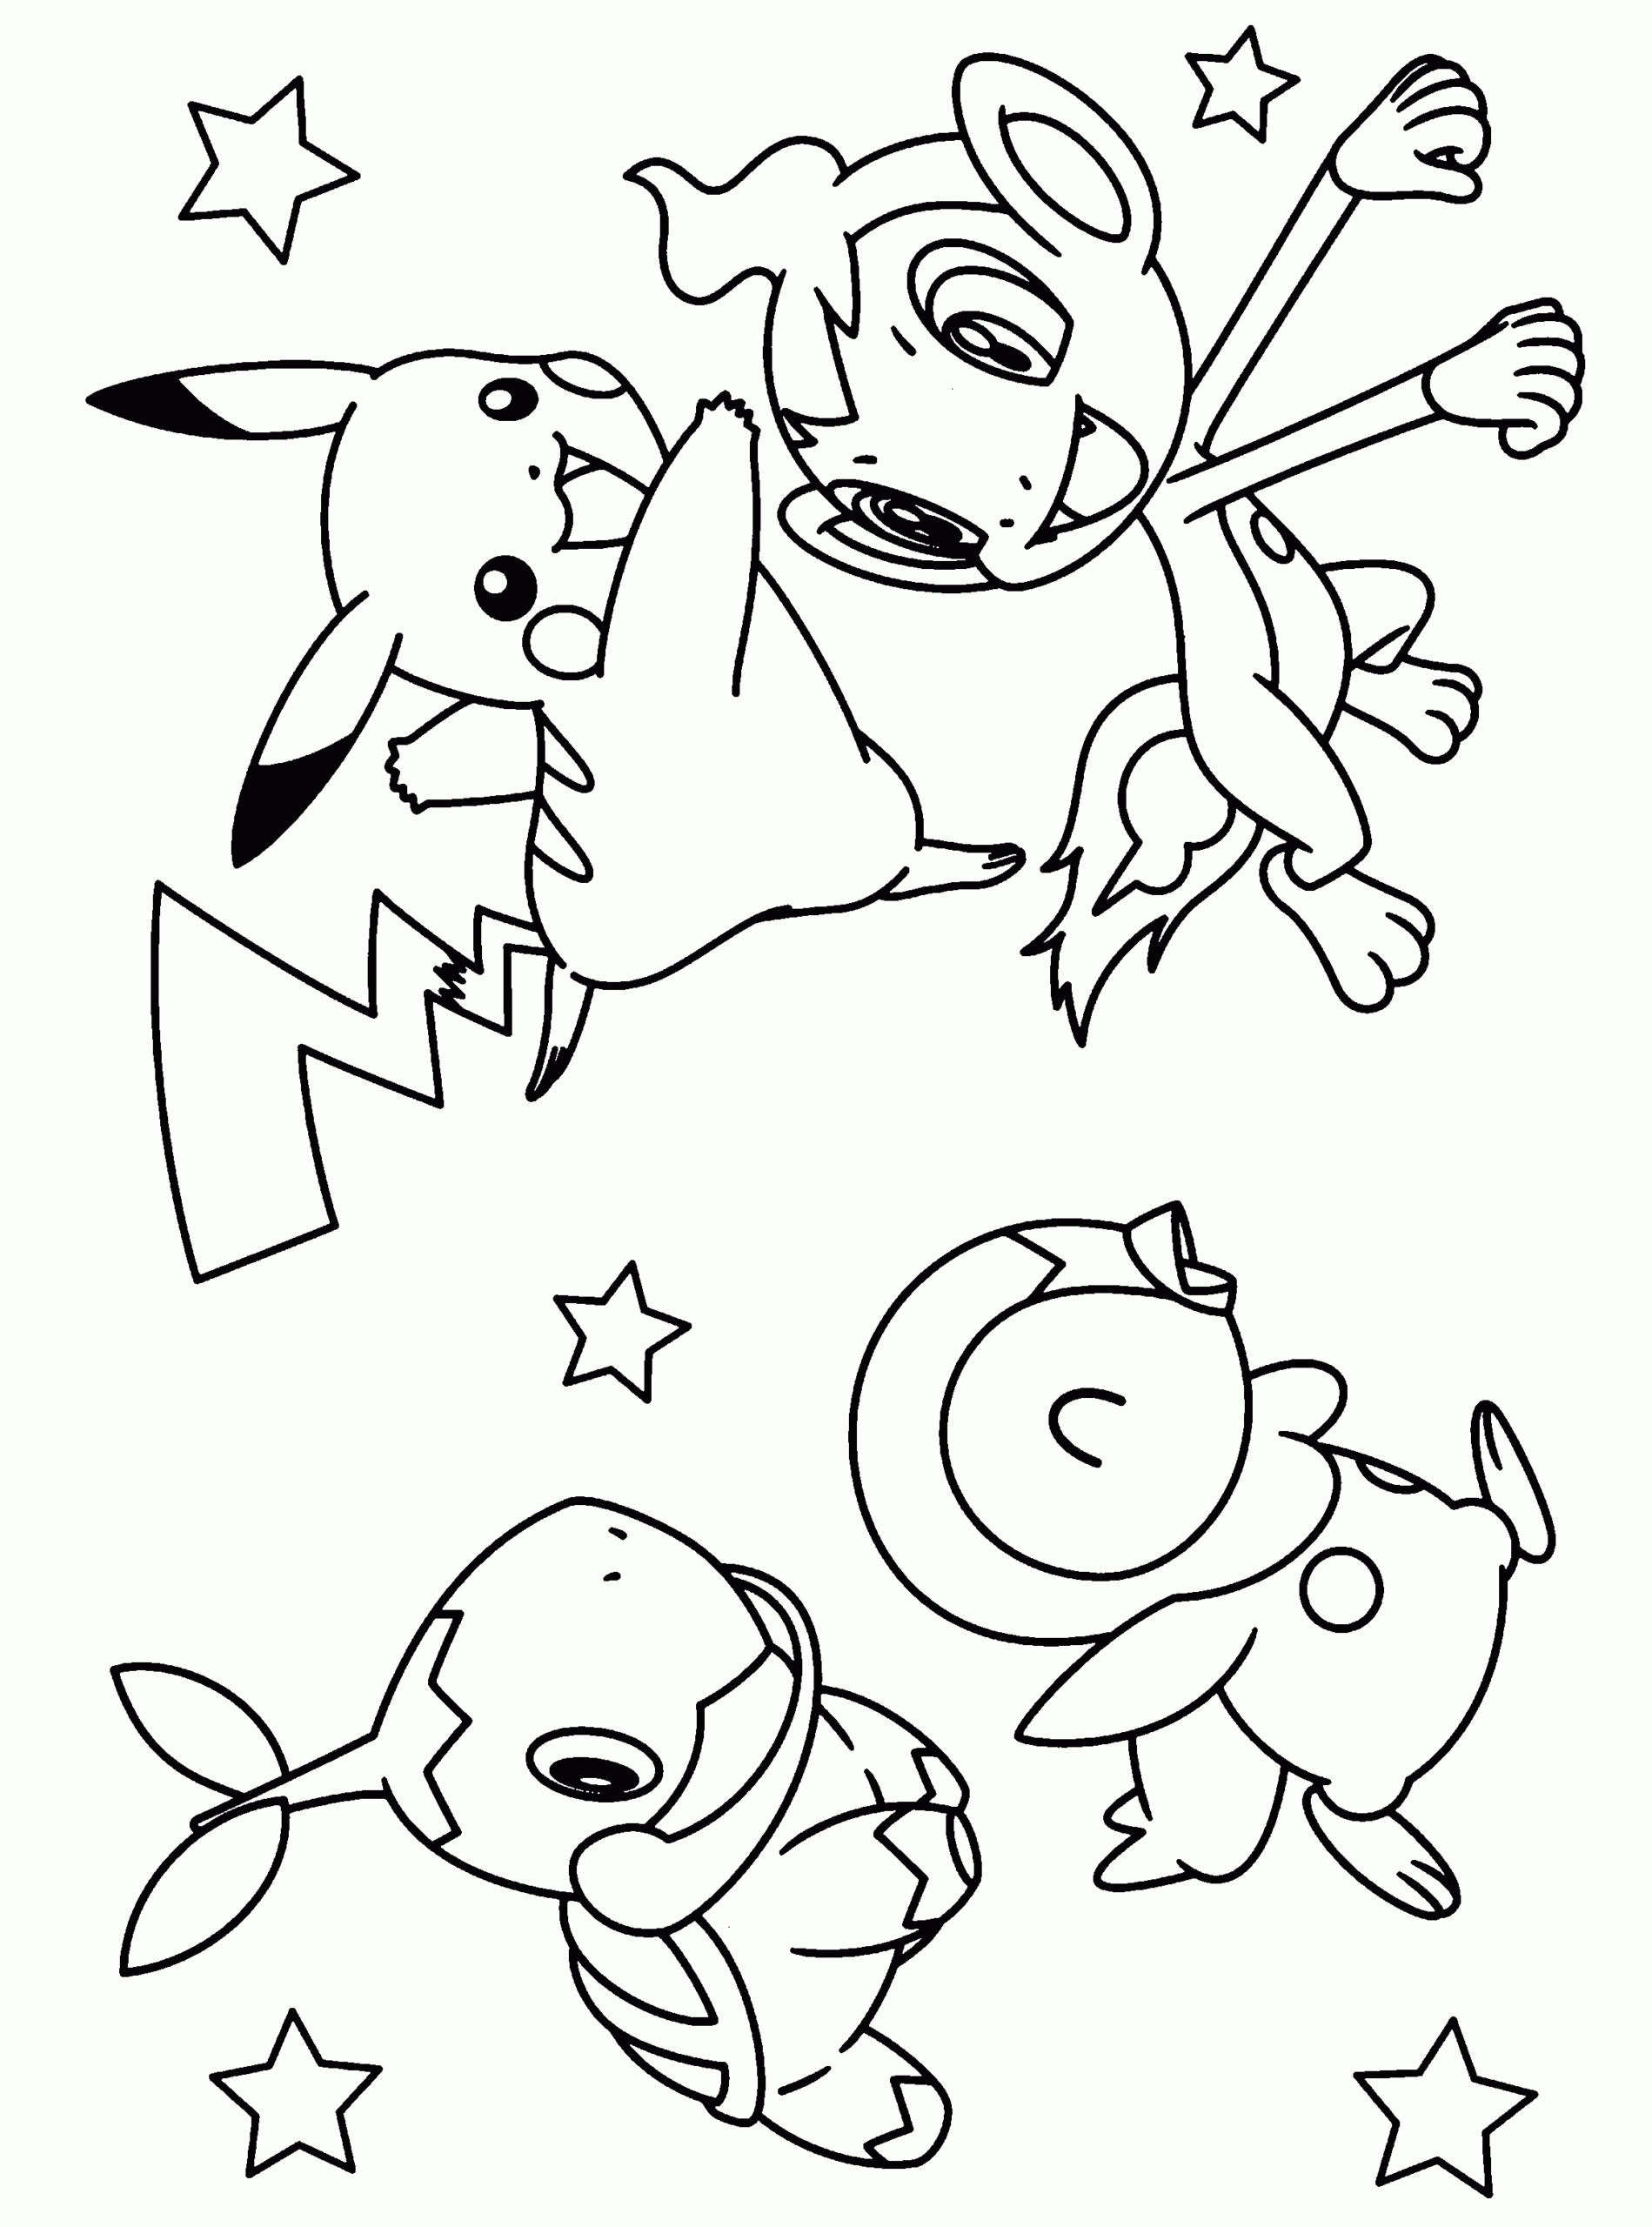 Printable Pokemon Pictures For Kids To Color